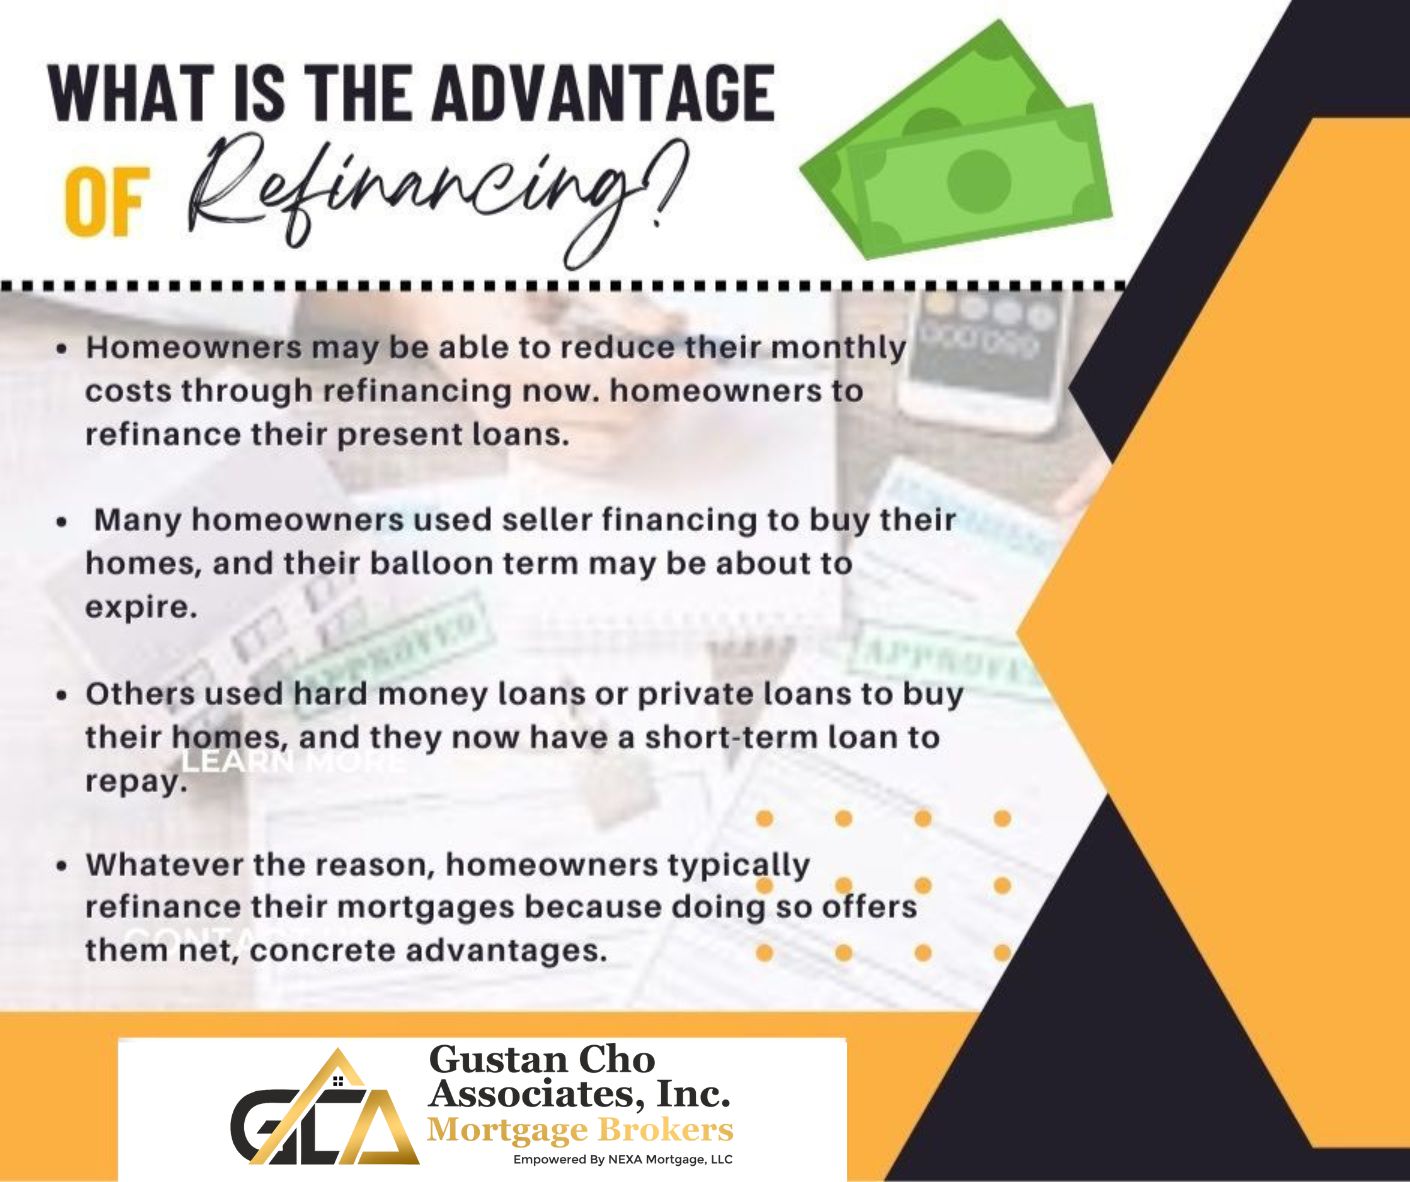 What Is The Advantage of Refinancing